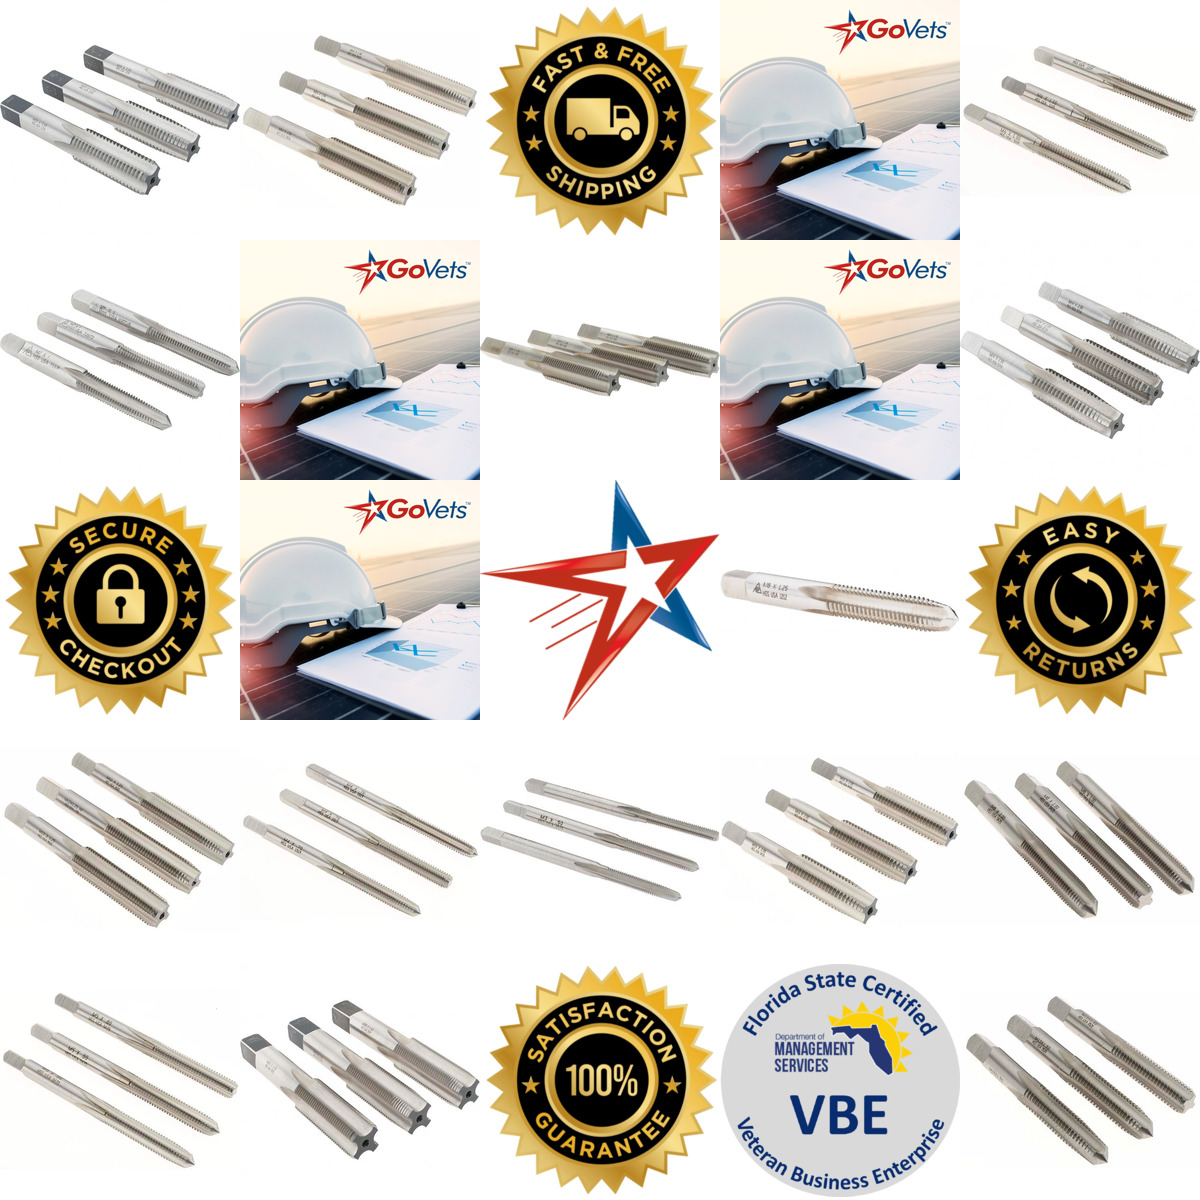 A selection of Msc products on GoVets